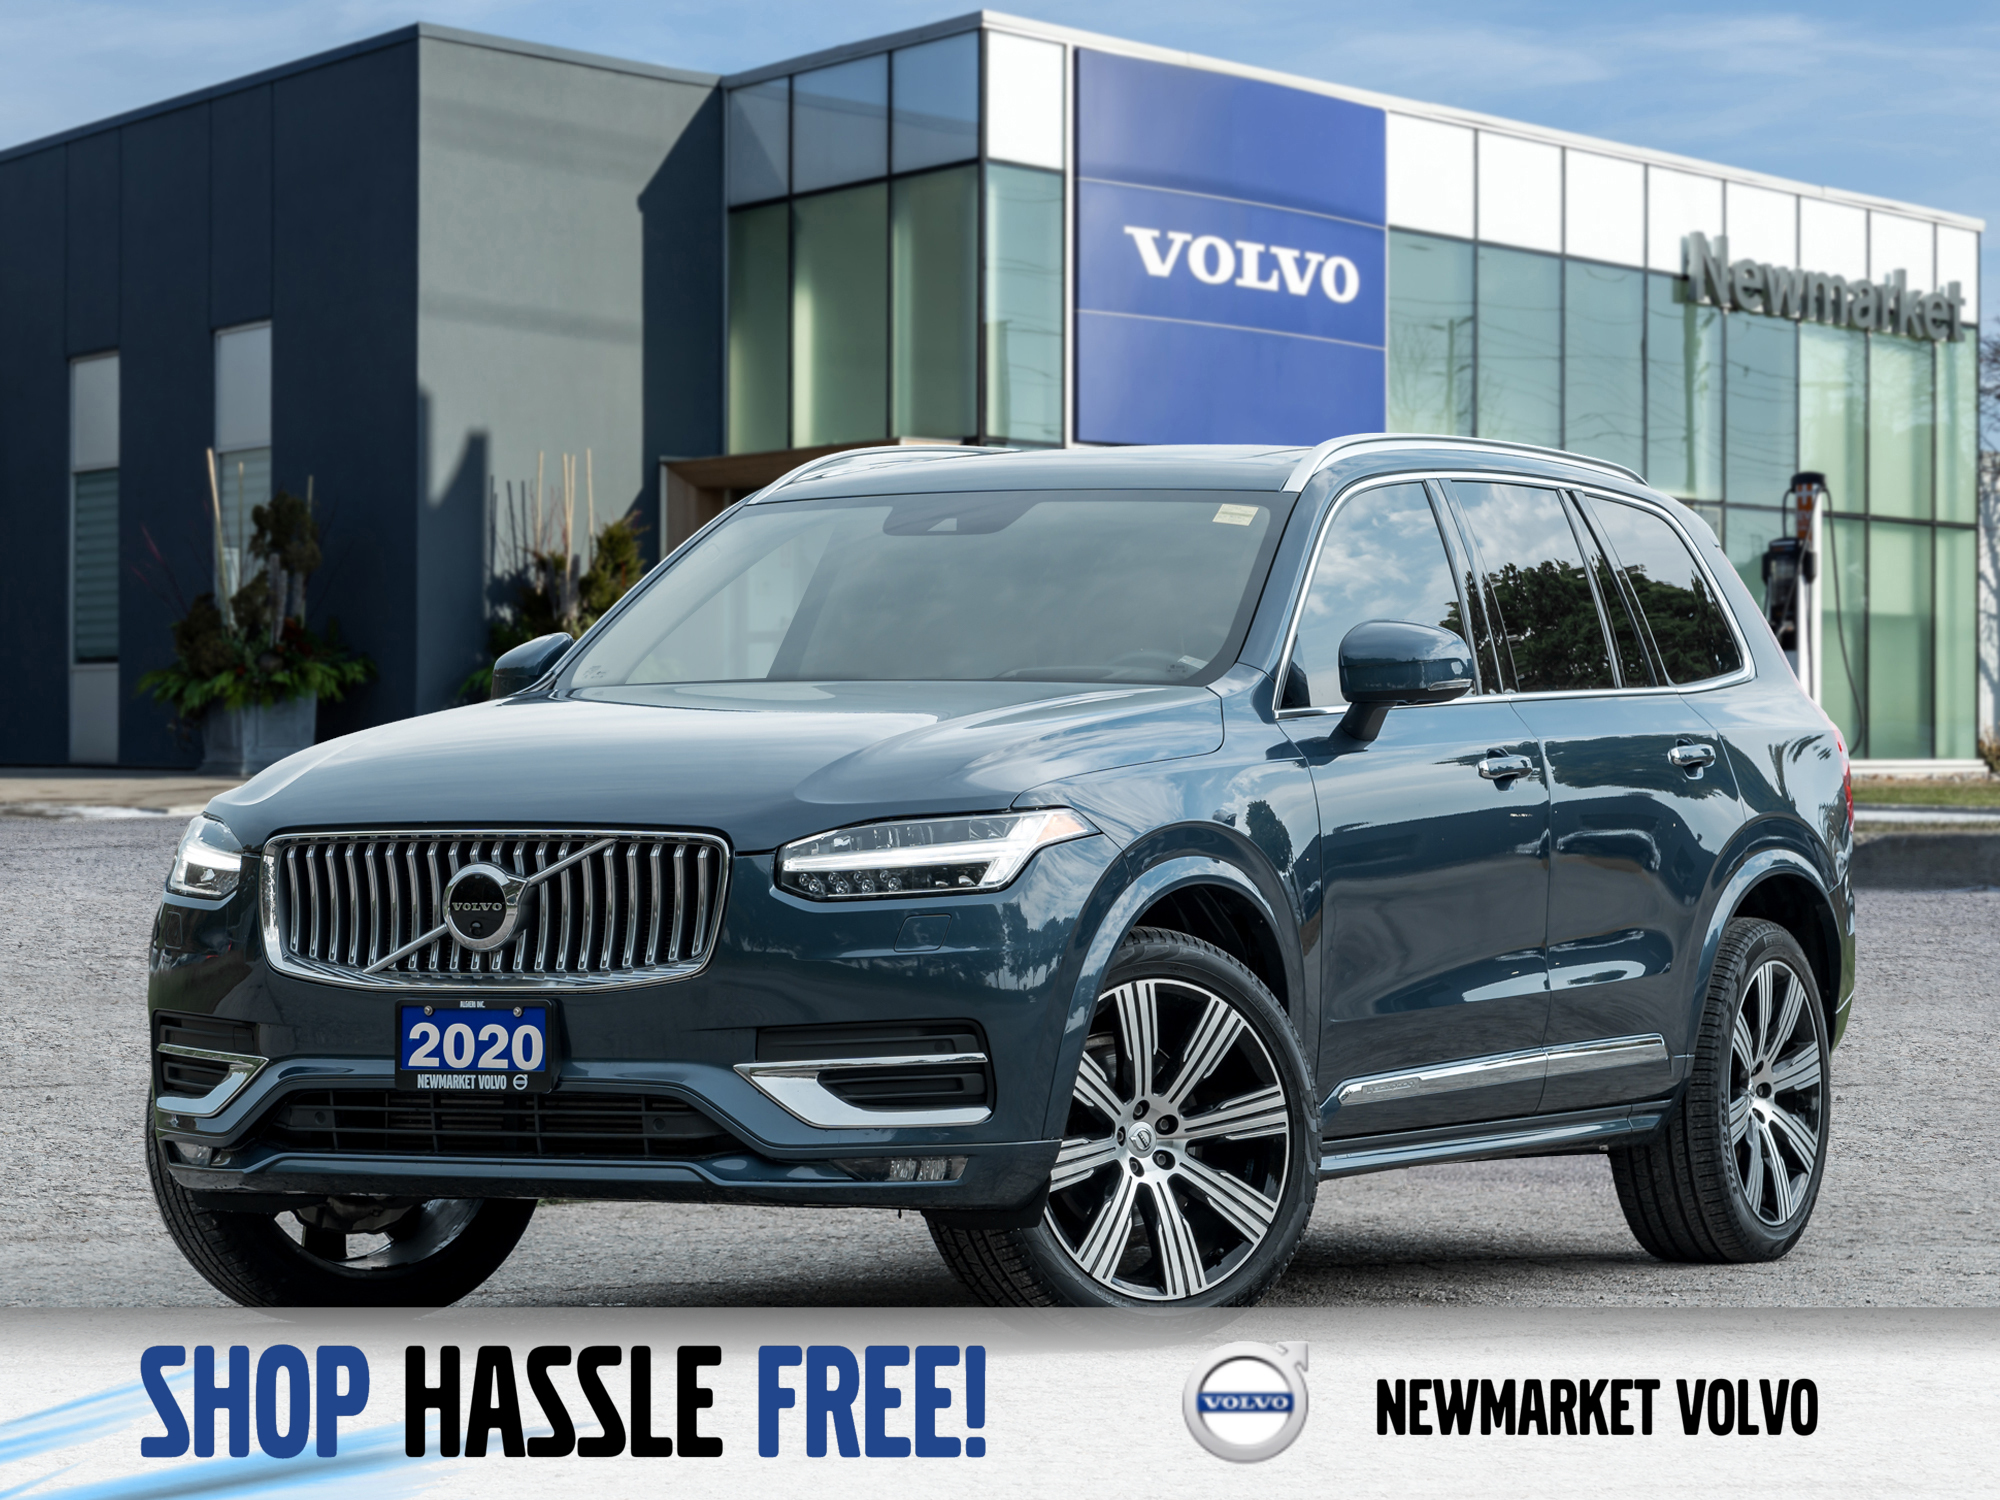 2020 Volvo XC90 T6 AWD Inscription 7-Seater CPO RATE fr 3.24%*